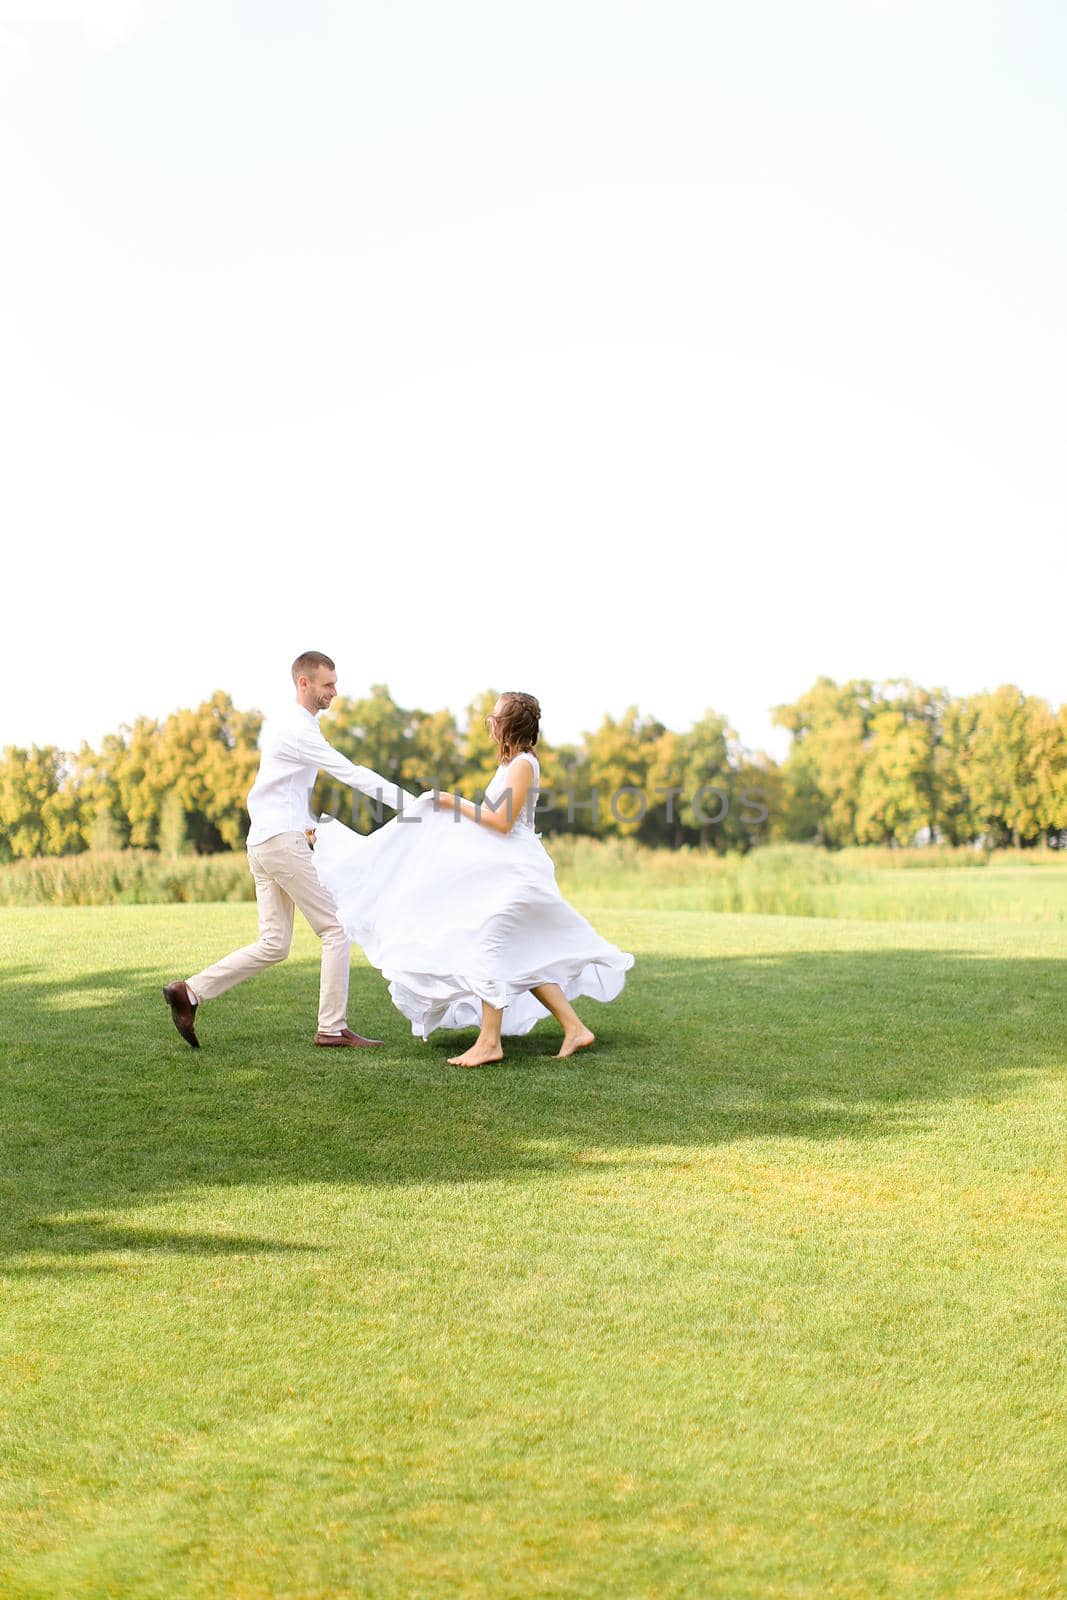 Groom and bride dancing on grass. Concept of wedding photo session on open air and nature.